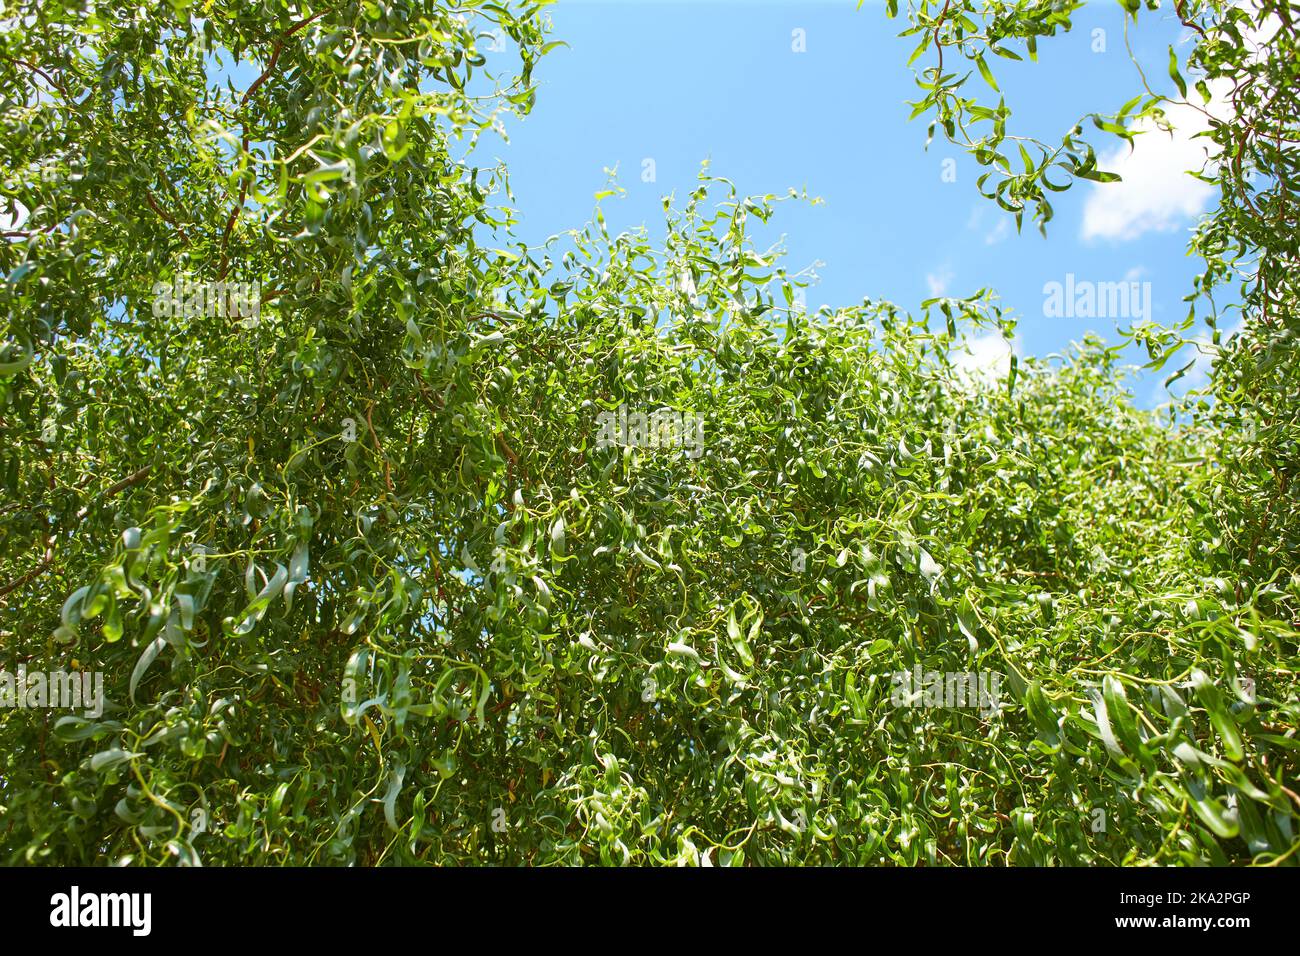 A large willow trees stands by the lake. Green young willow branches near the water. The background is blue sky and water. Spring concept. Stock Photo